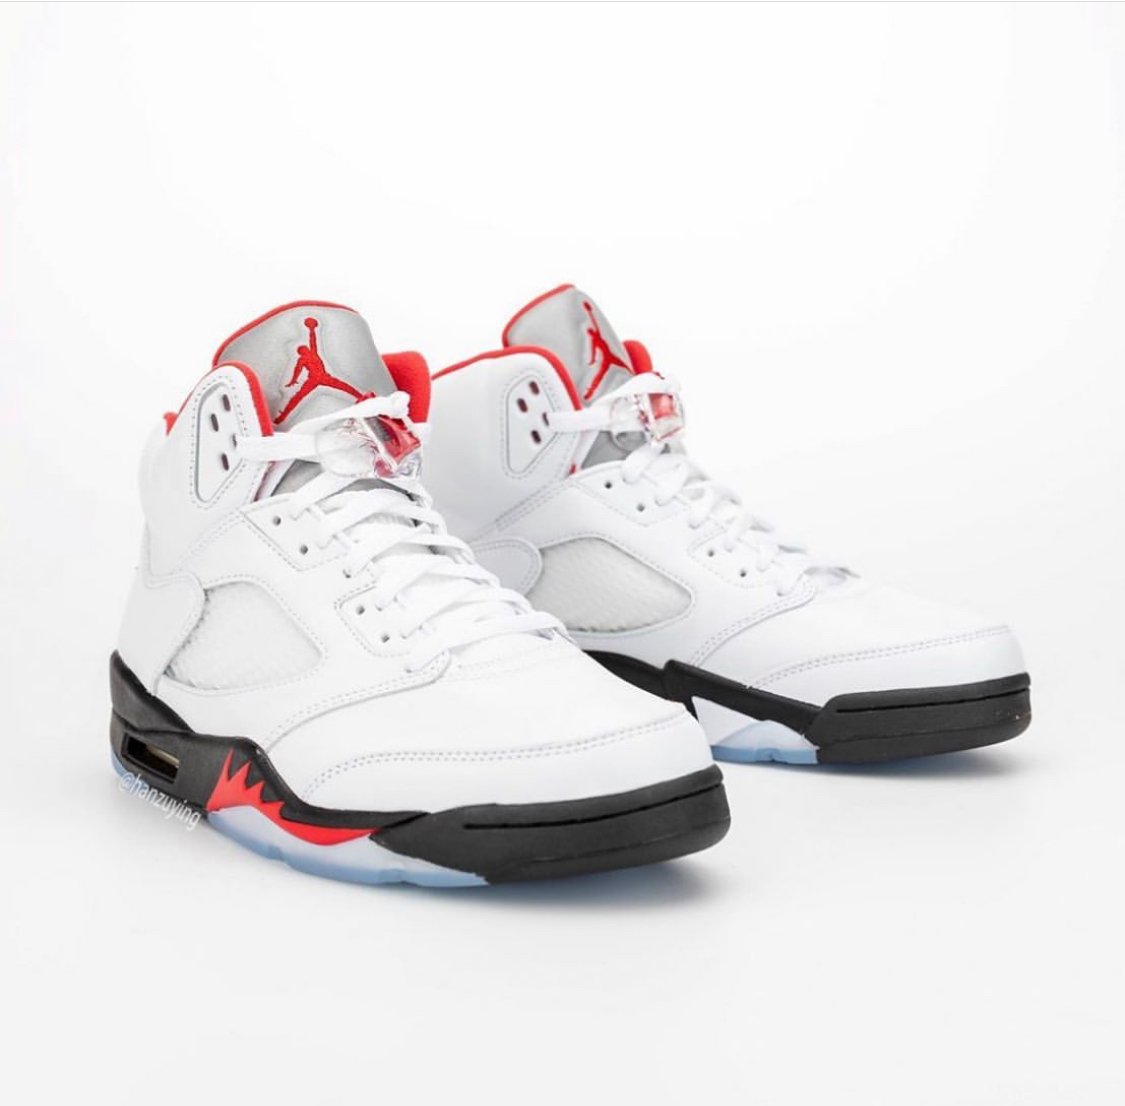 jordan 5 fire red sold out